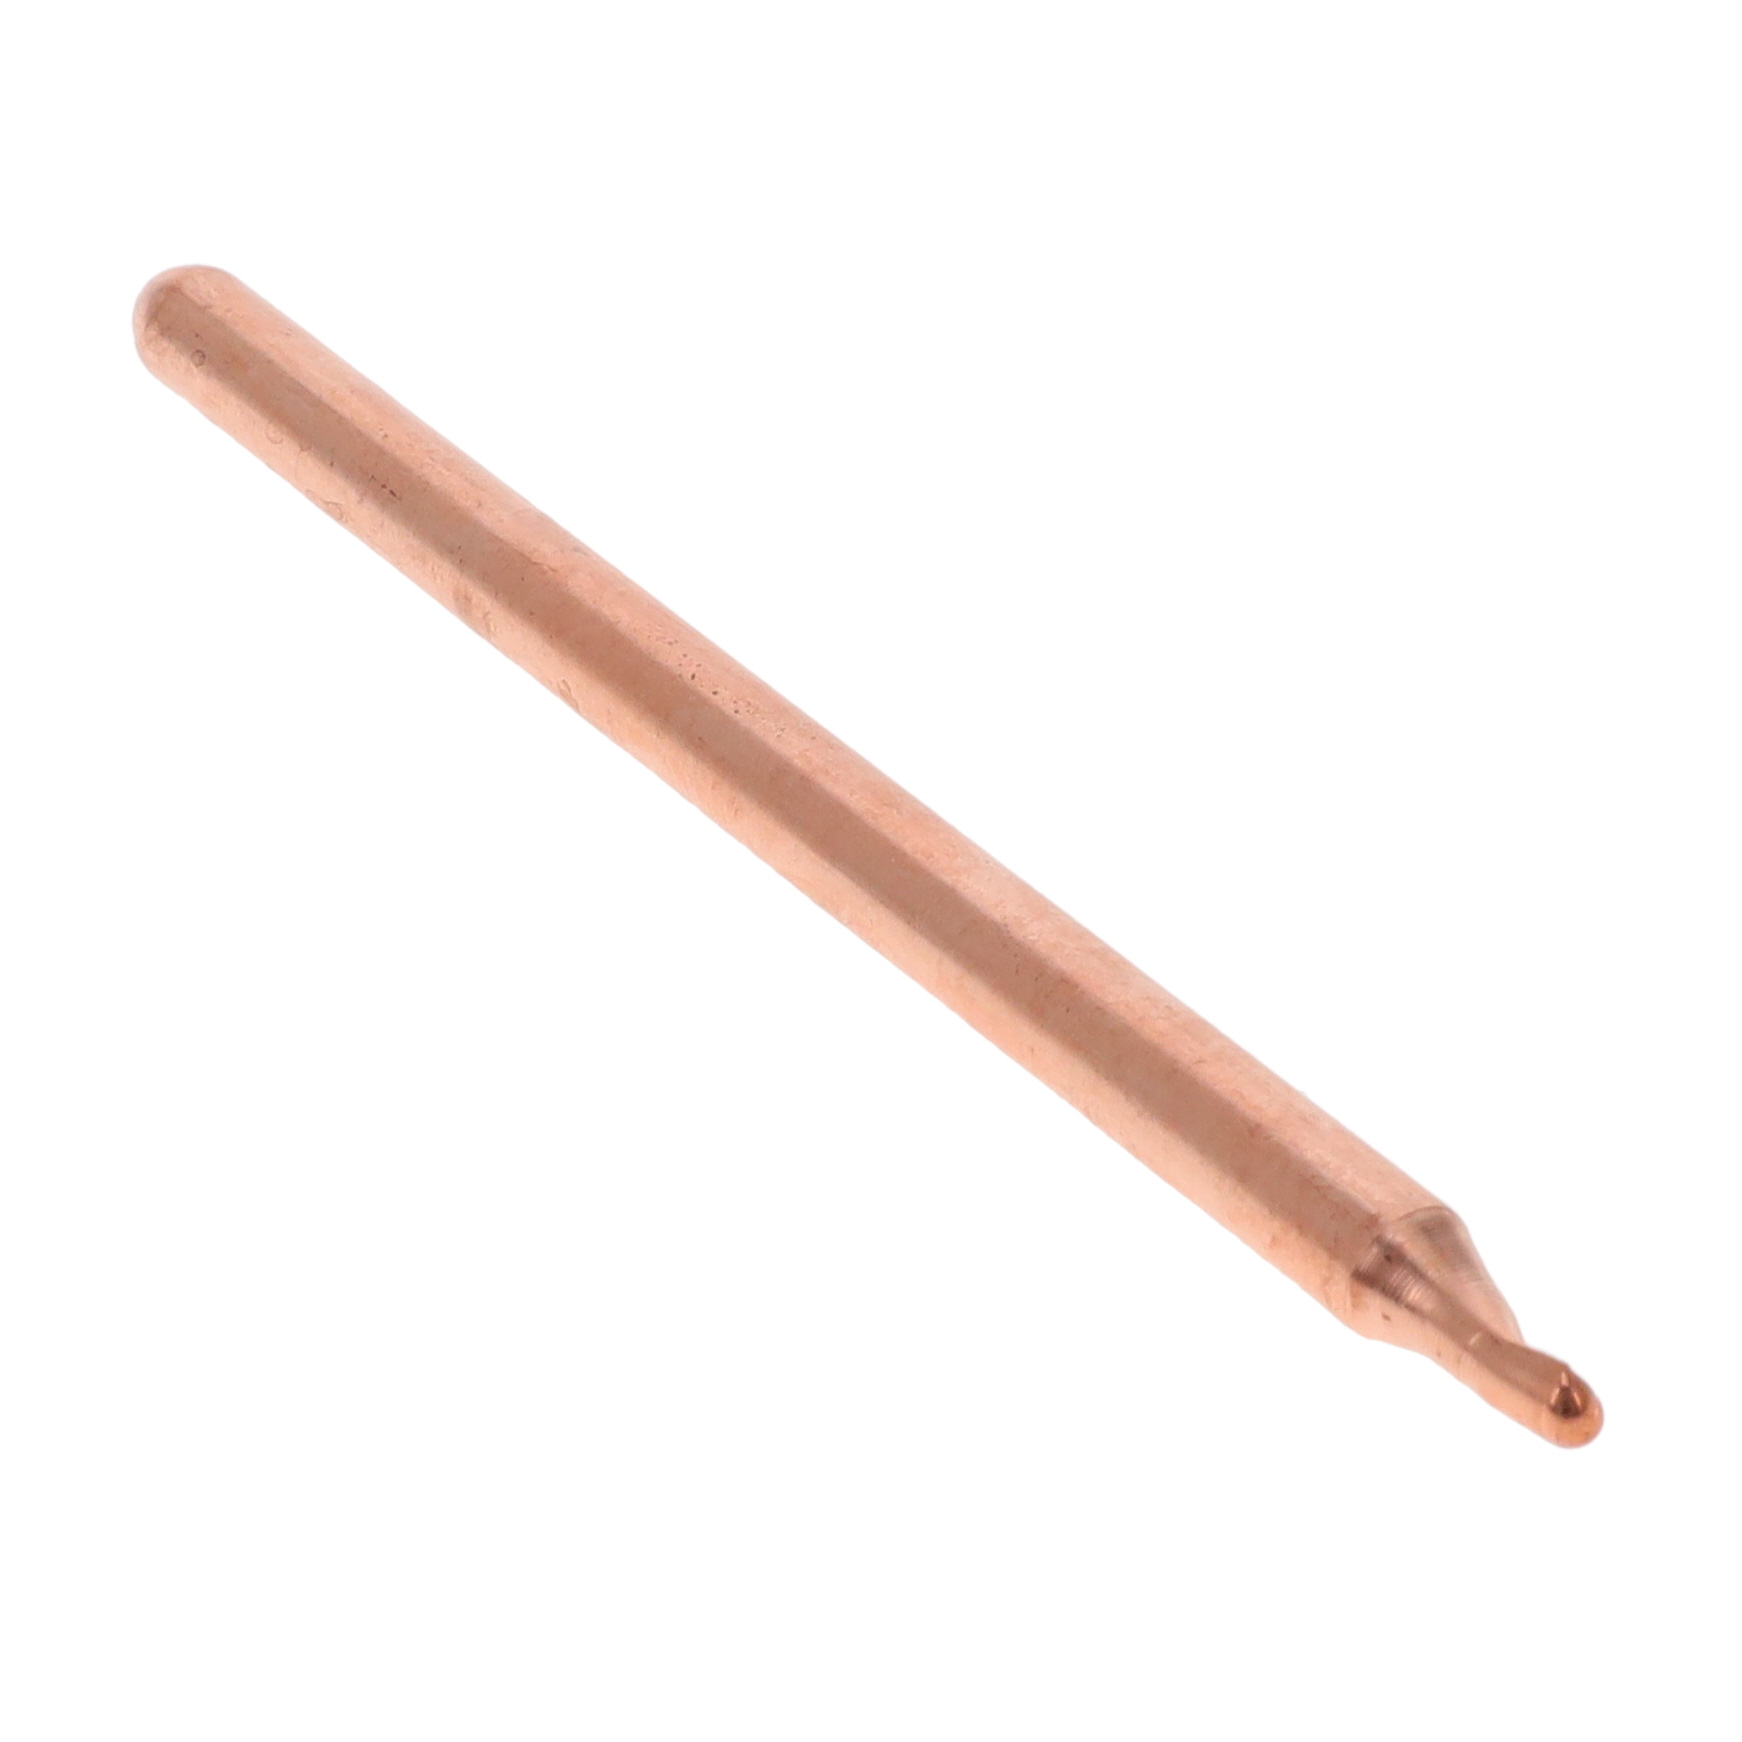 【HP-CWS-R06-100-N】COPPER-WATER HEAT PIPE, ROUND, D